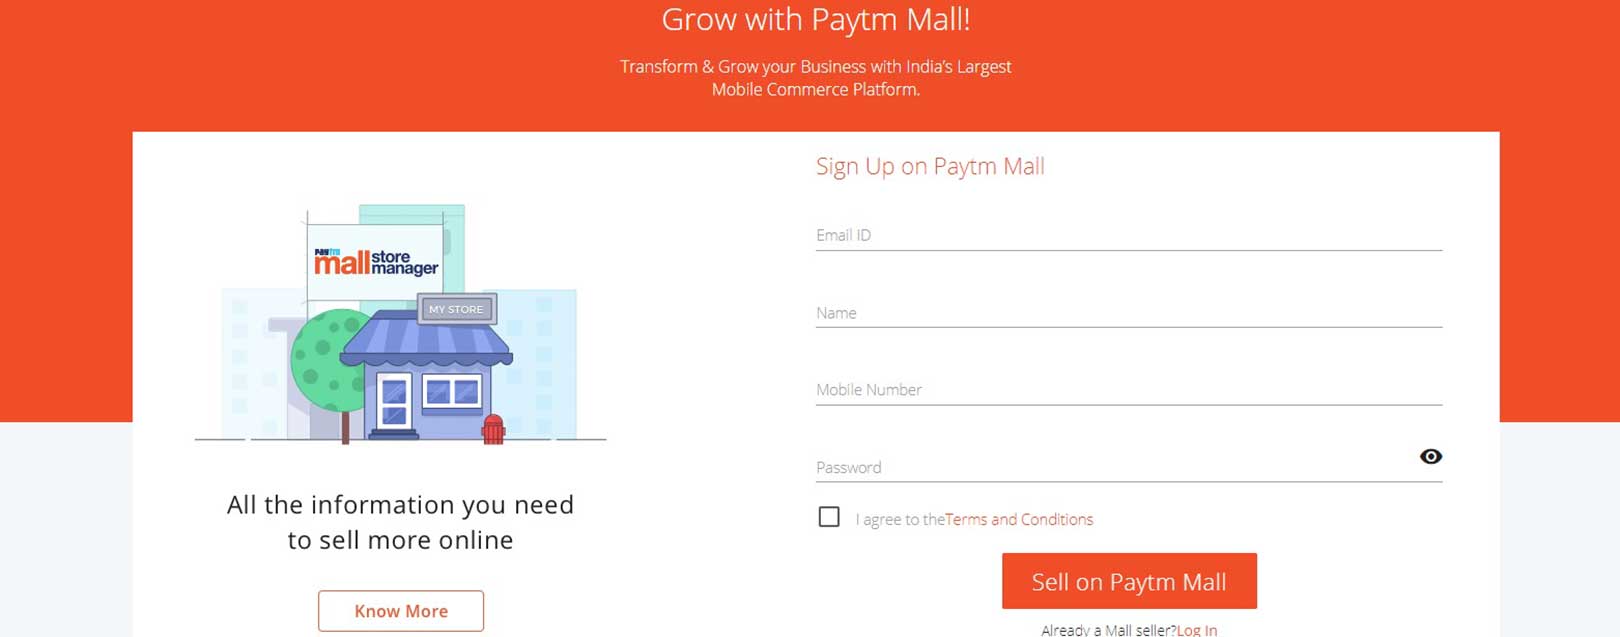 Paytm Mall to pump in $35 million in logistics